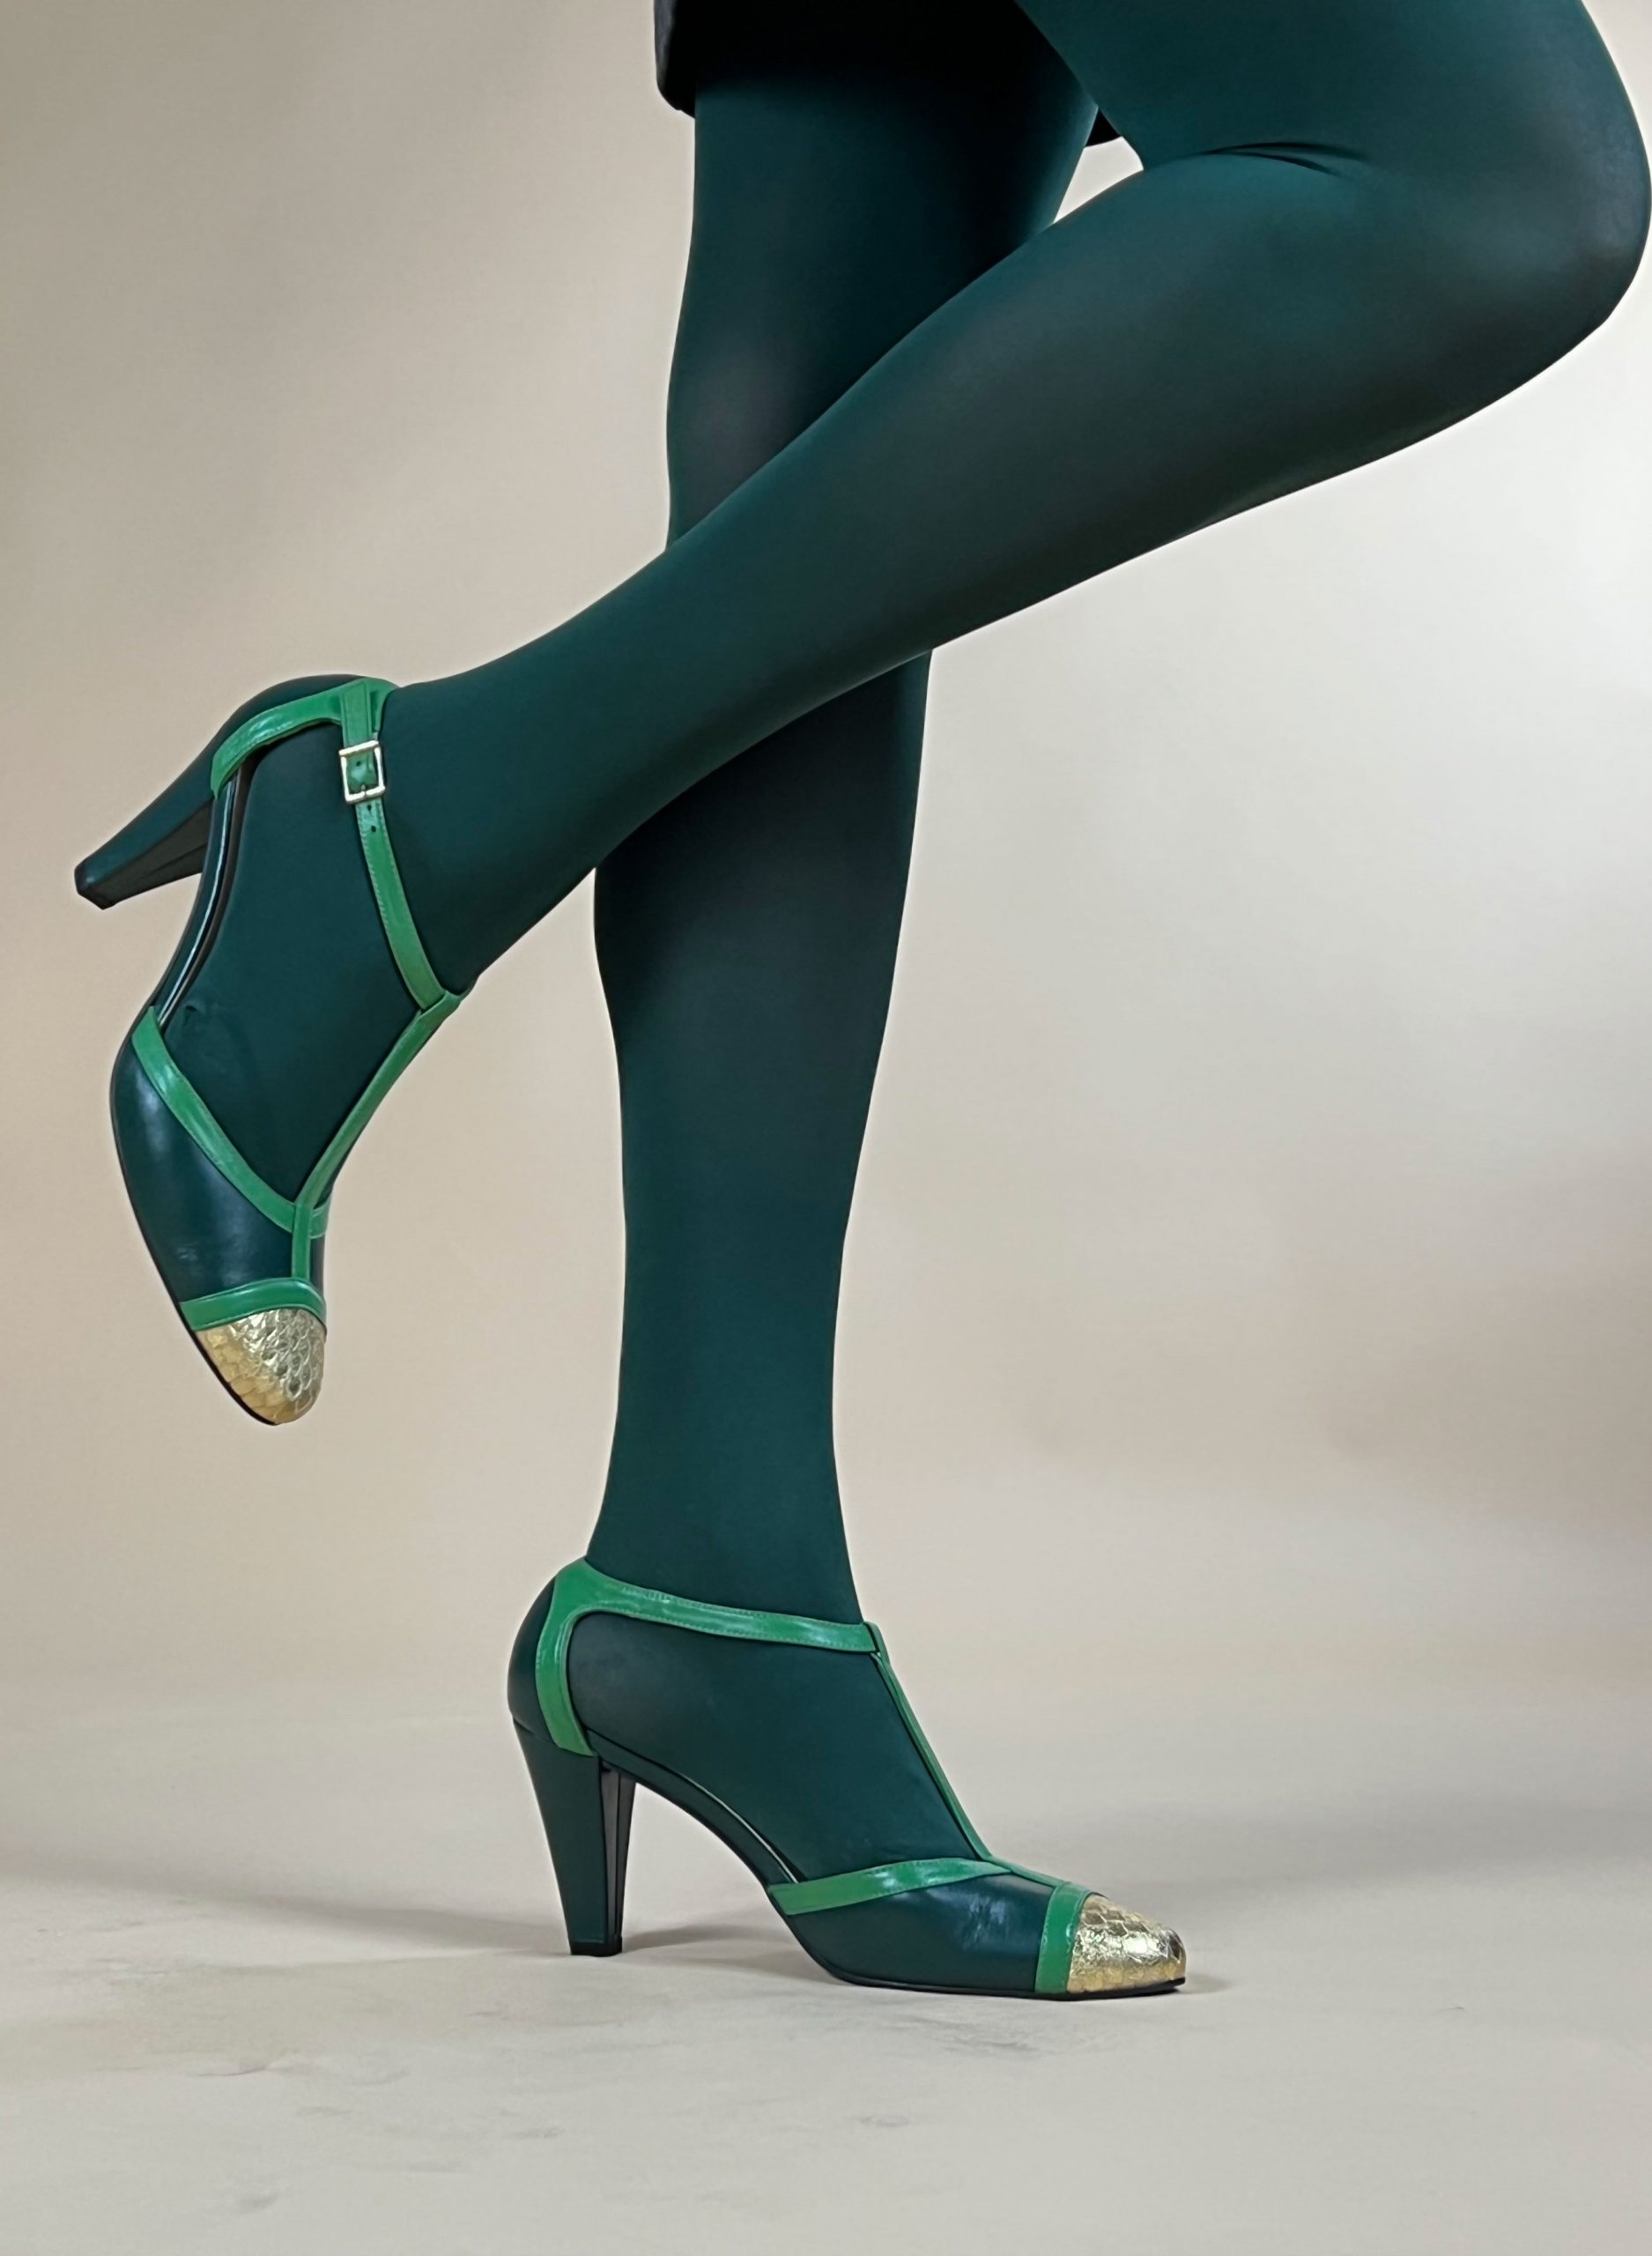 https://www.modshoes.co.uk/wp-content/uploads/2022/04/mod-shoes-ladies-tights-80-denier-opaque-tights-forest-green-04-scaled.jpg